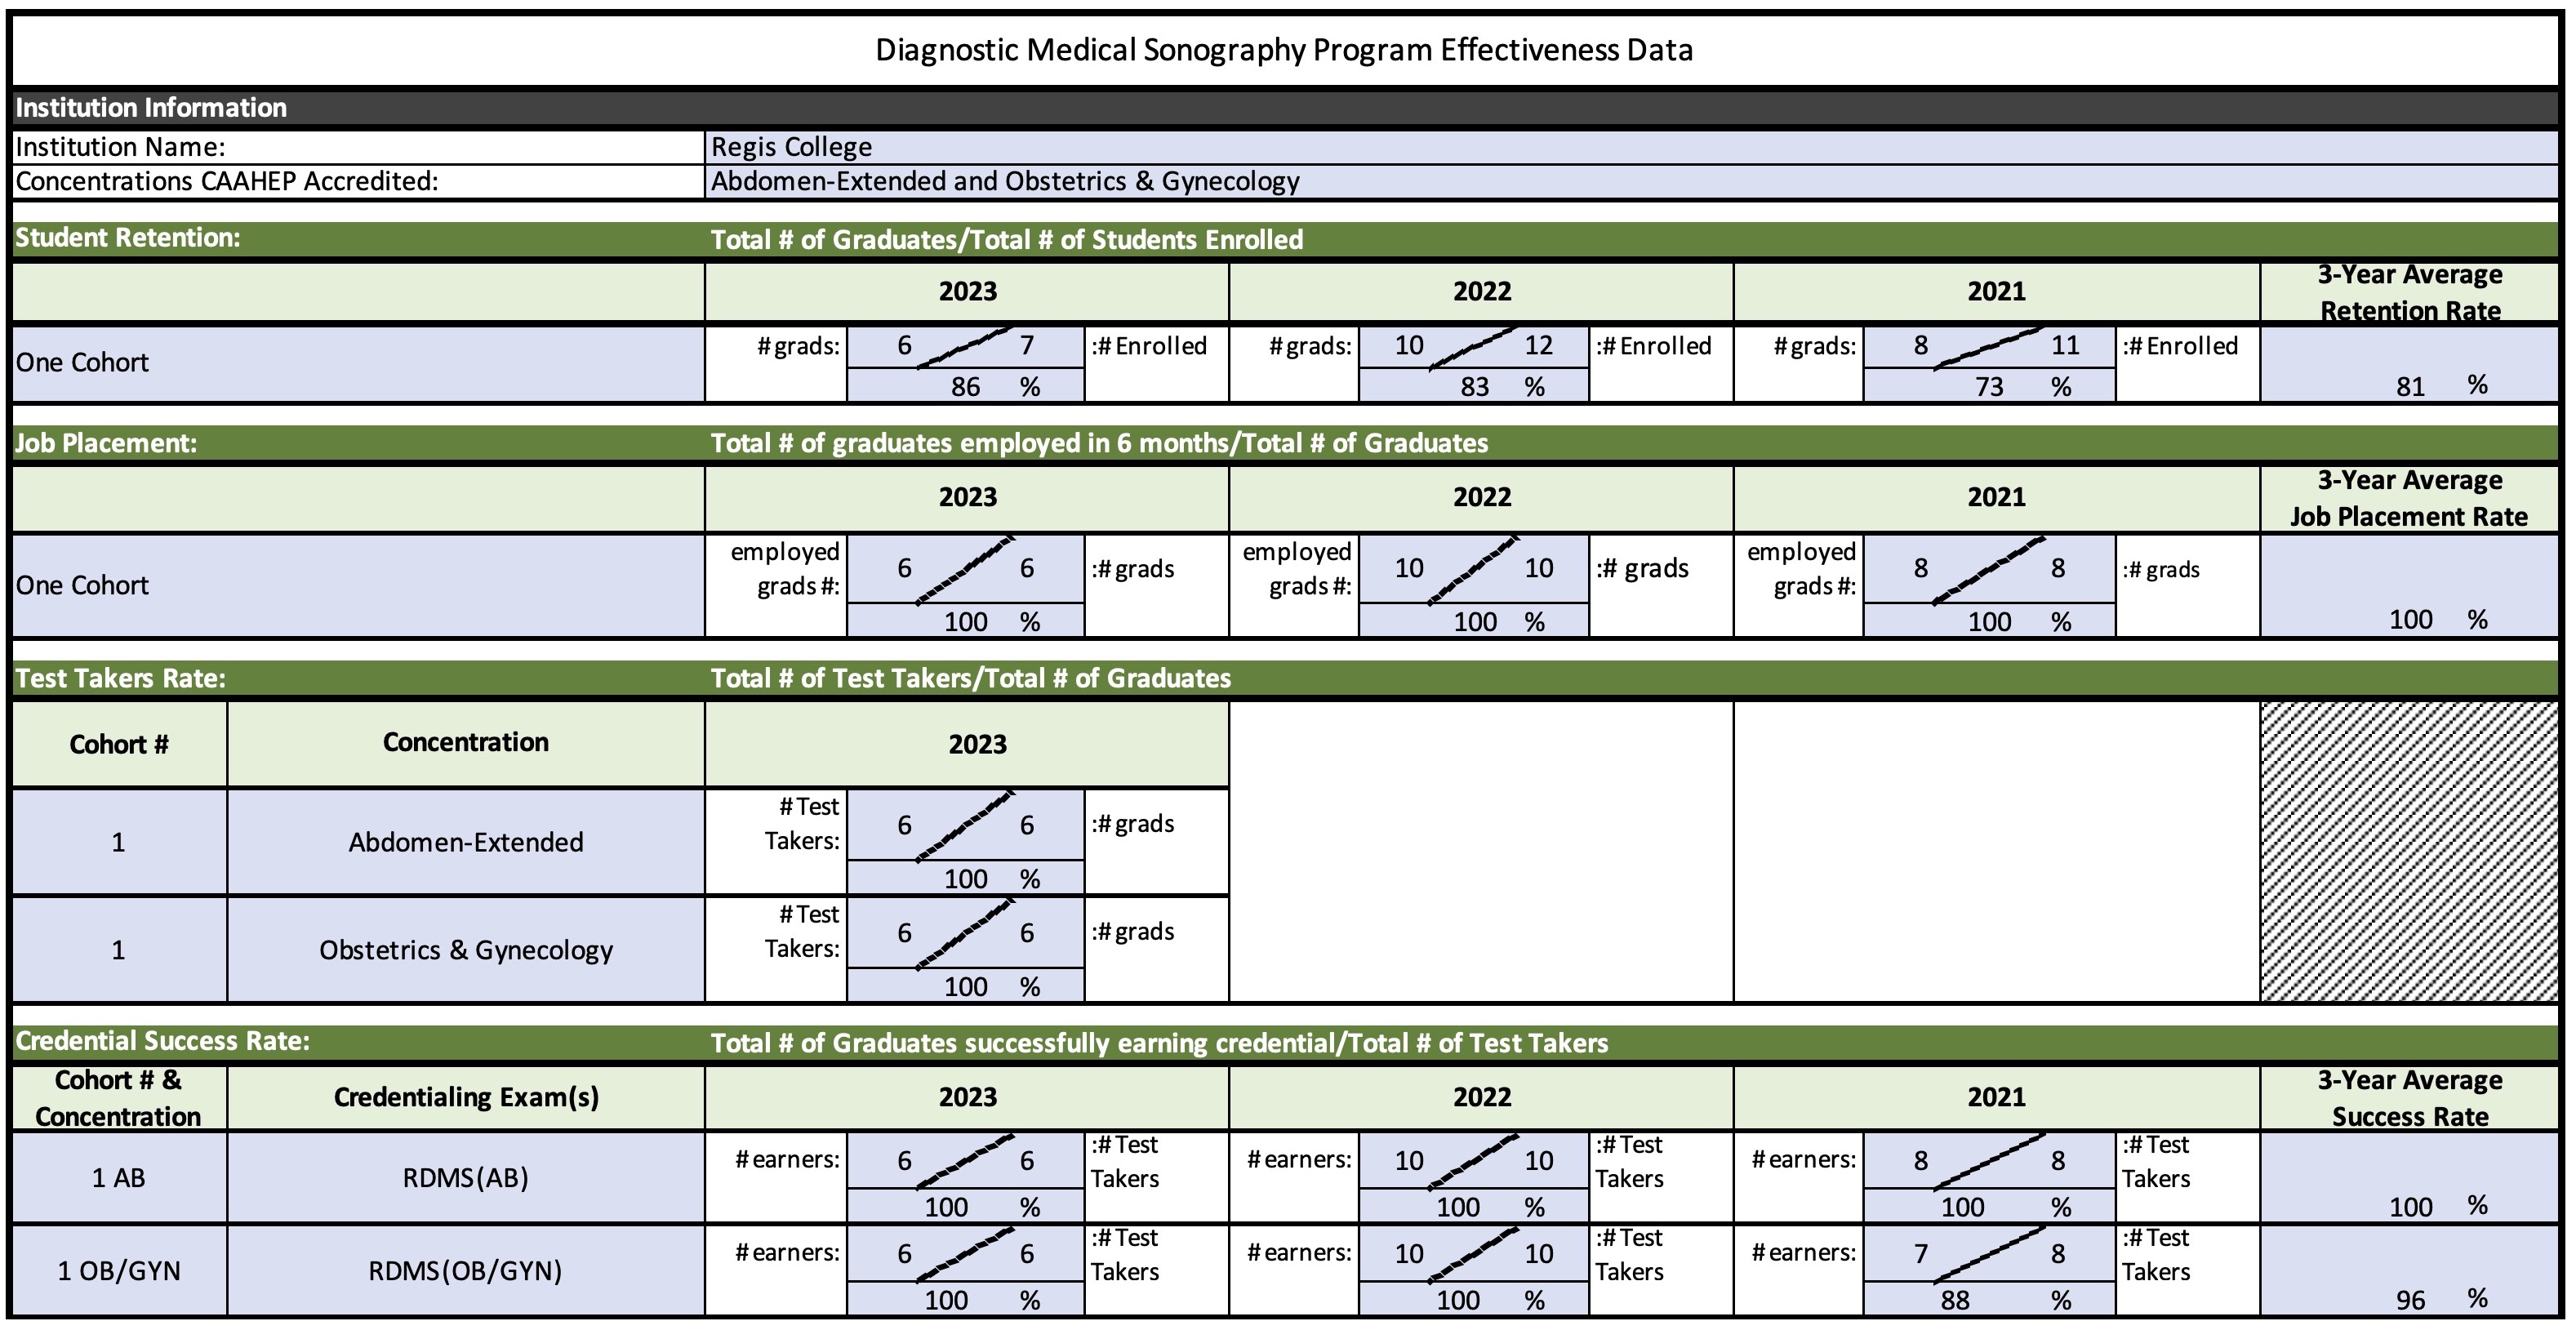 This table presents the Diagnostic Medical Sonography Program Effectiveness data for Regis College. The data covers program effectiveness in the concentrations CAAHEP accredited in abdomen-extended and obstetrics and gynecology. Student retention is defined as the total number of graduates divided by the total number of students enrolled. In 2023, the student retention was 86% (6 of 7 students). In 2022, the student retention was 83% (10 of 12 students). In 2021, the student retention was 73% (8 of 11 students). The 3-year average retention rate is 81%. Job placement is defined as the total number of graduates employed in 6 months divided by the total number of graduates. In 2023, the student job placement was 100% (6 of 6 students). In 2022, the student job placement was 100% (10 of 10 students). In 2021, the student job placement was 100% (8 of 8 students). The 3-year average student job placement rate is 100%. Test takers rate is defined as the total number of test takers divided by the total number of graduates. In 2023, the test taker rate for abdomen-extended was 100% (6 of 6 graduates). In 2023, the test taker rate for obstetrics and gynecology was 100% (6 of 6 graduates). Credential success rate is defined as the total number of graduates successfully earning credentials divided by the total number of test takers. For the abdomen concentration taking the RDMS(AB) credentialing exam: in 2023, 100% of students (6 of 6 test takers) successfully earned the credential. In 2022, 100% of students (10 of 10 test takers) successfully earned the credential. In 2021, 100% of students (8 of 8 test takers) successfully earned the credential. The 3-year average success rate is 100%. For the obstetrics and gynecology concentration taking the RDMS(OB/GYN) credentialing exam: in 2023, 100% of students (6 of 6 test takers) successfully earned the credential. In 2022, 100% of students (10 of 10 test takers) successfully earned the credential. In 2021, 88% of students (7of 8 test takers) successfully earned the credential. The 3-year average success rate is 96%.